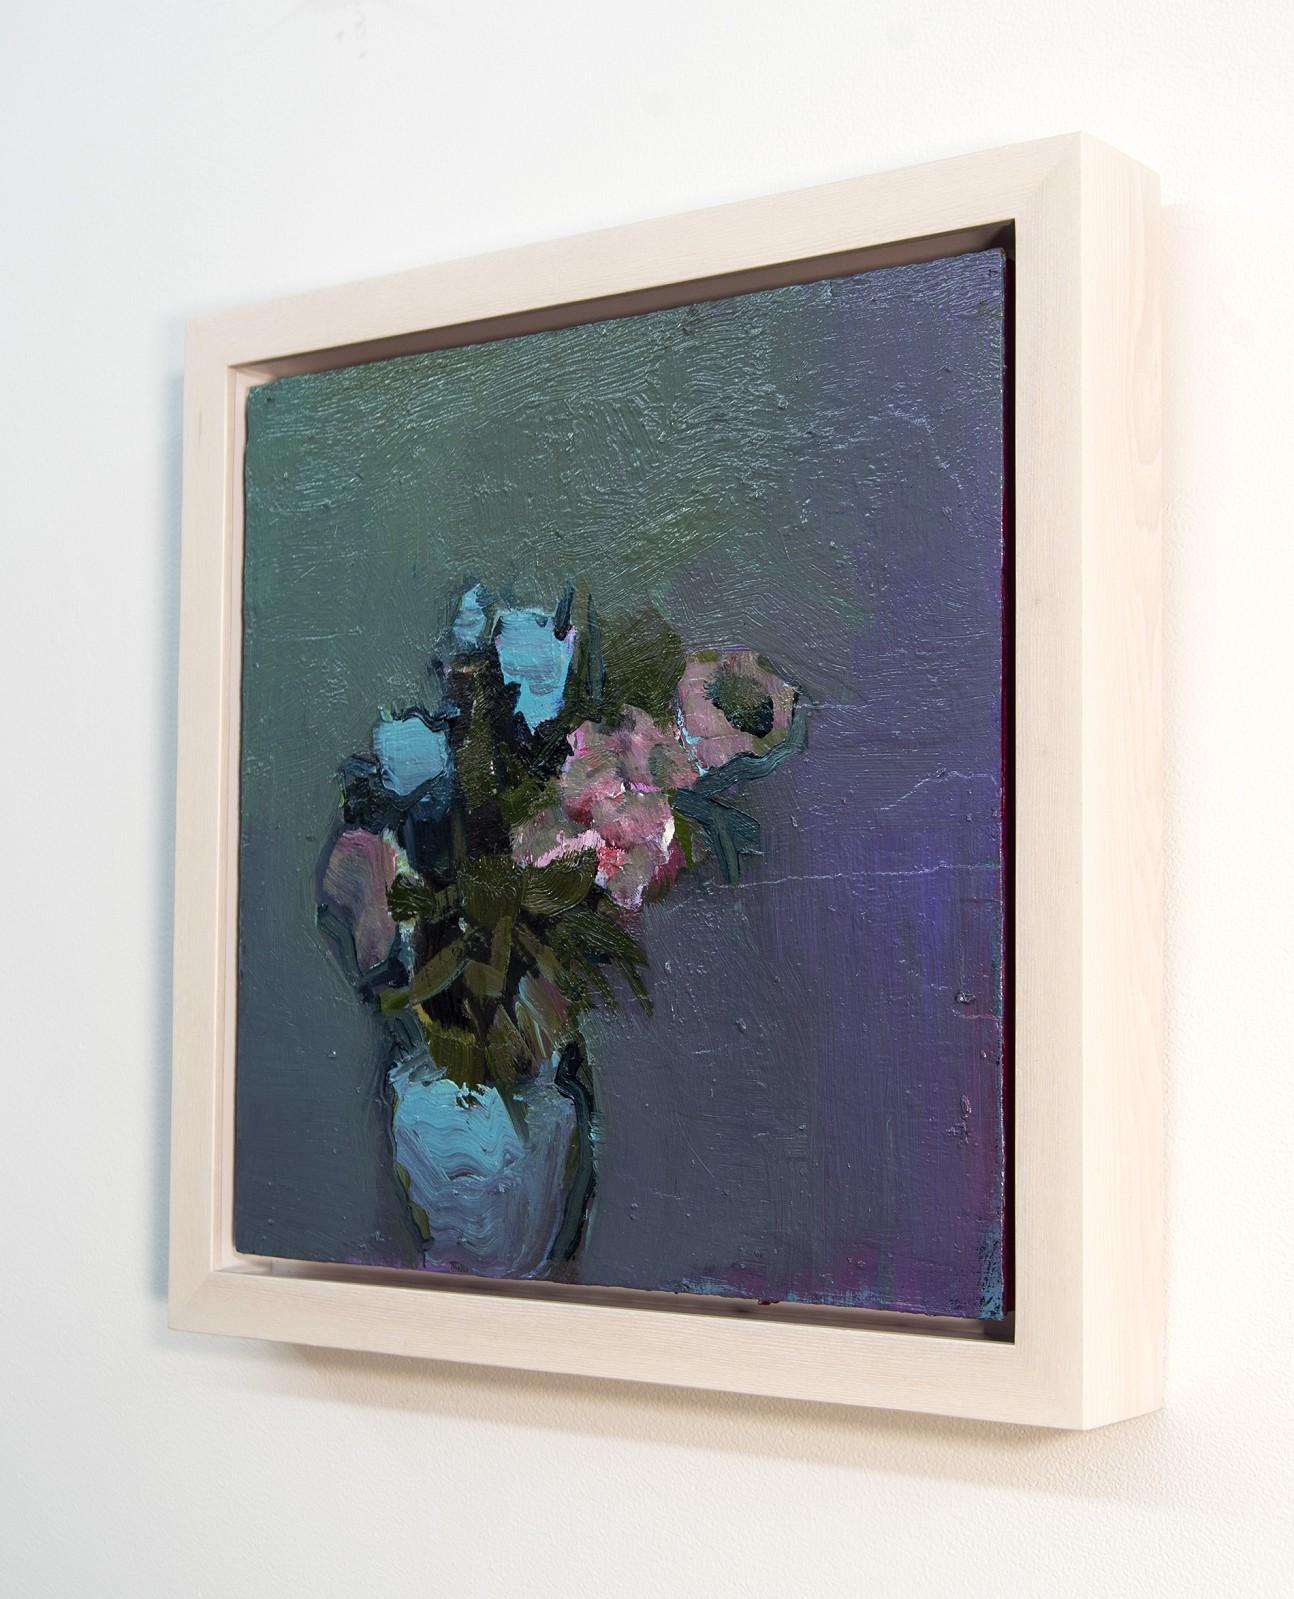 This lovely oil painting of flowers by British artist Jennifer Hornyak in soft pinks and pale blues, highlighted by green foliage is set against a deep purple and sea-green background. Pimpernels are classic flowers from the primrose family often